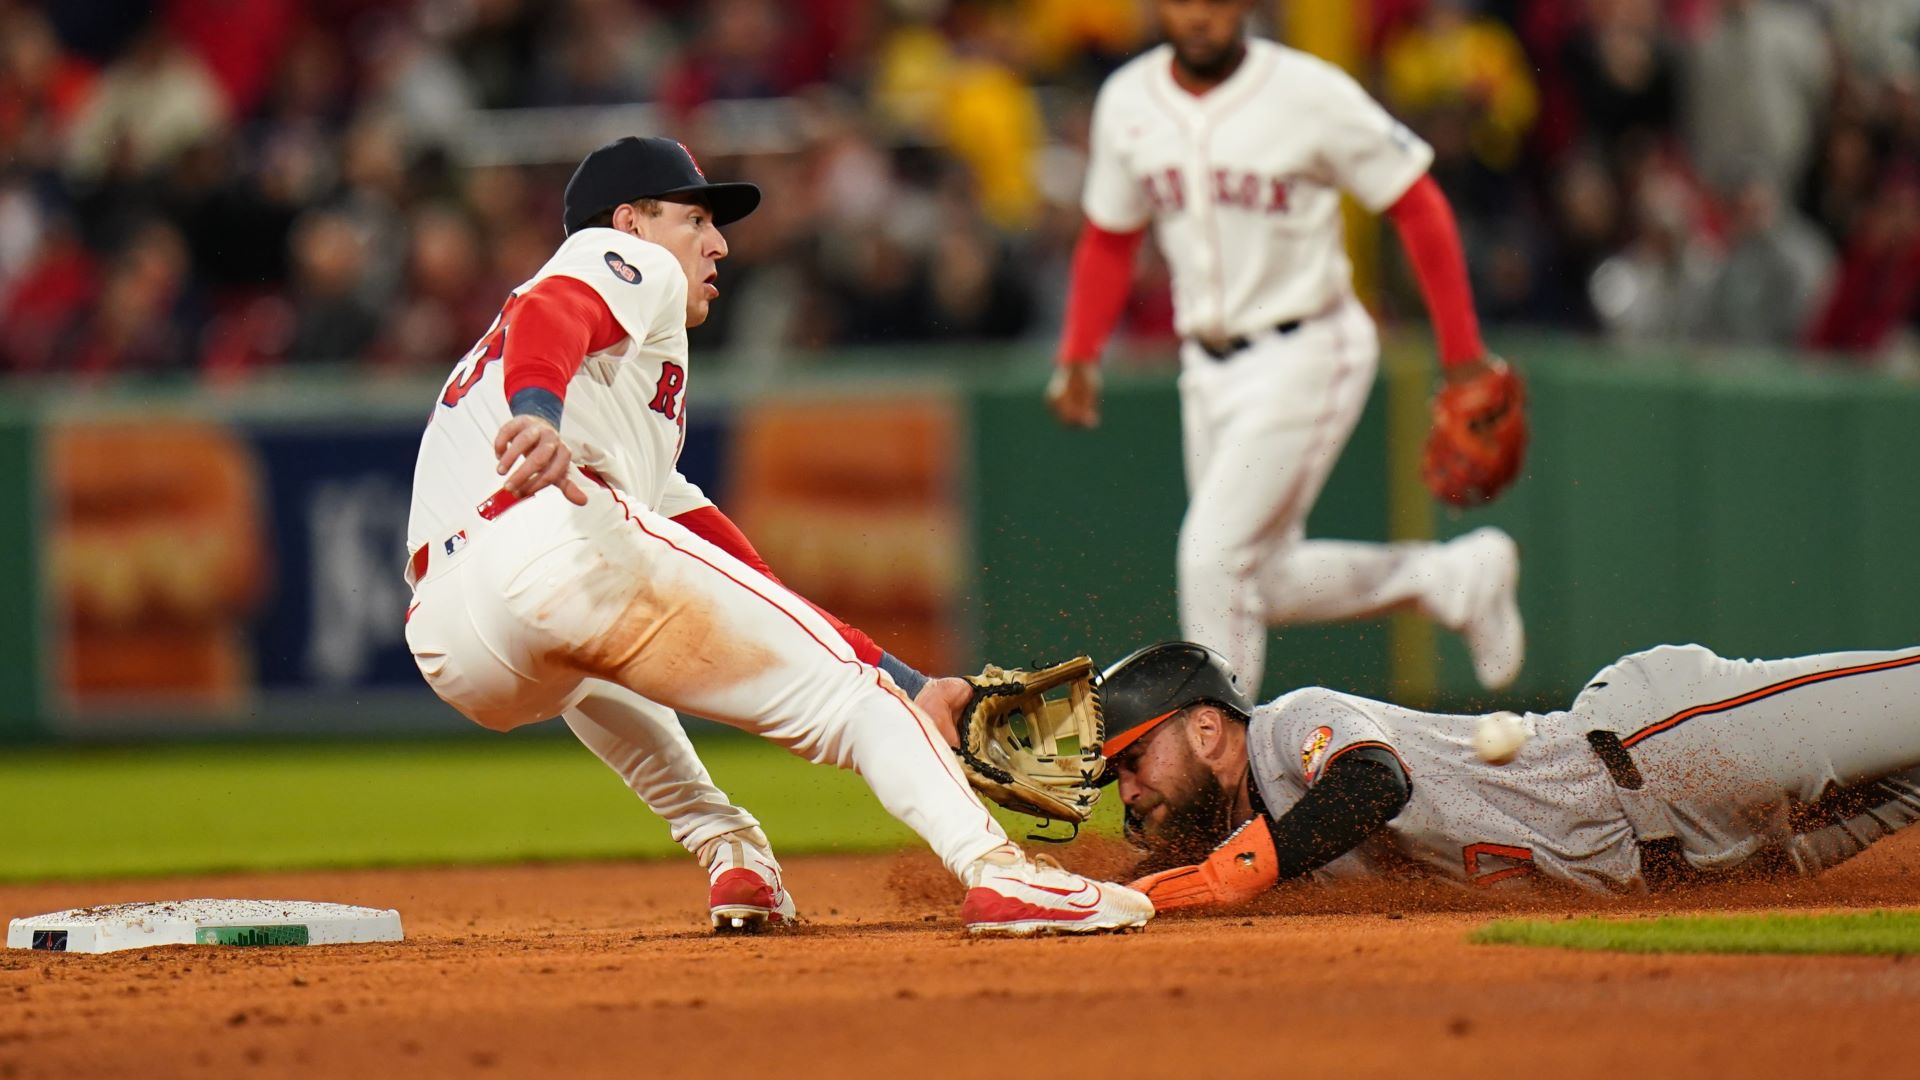 Recent Red Sox Call Up Already Dealing With Wrist Injury [Video]